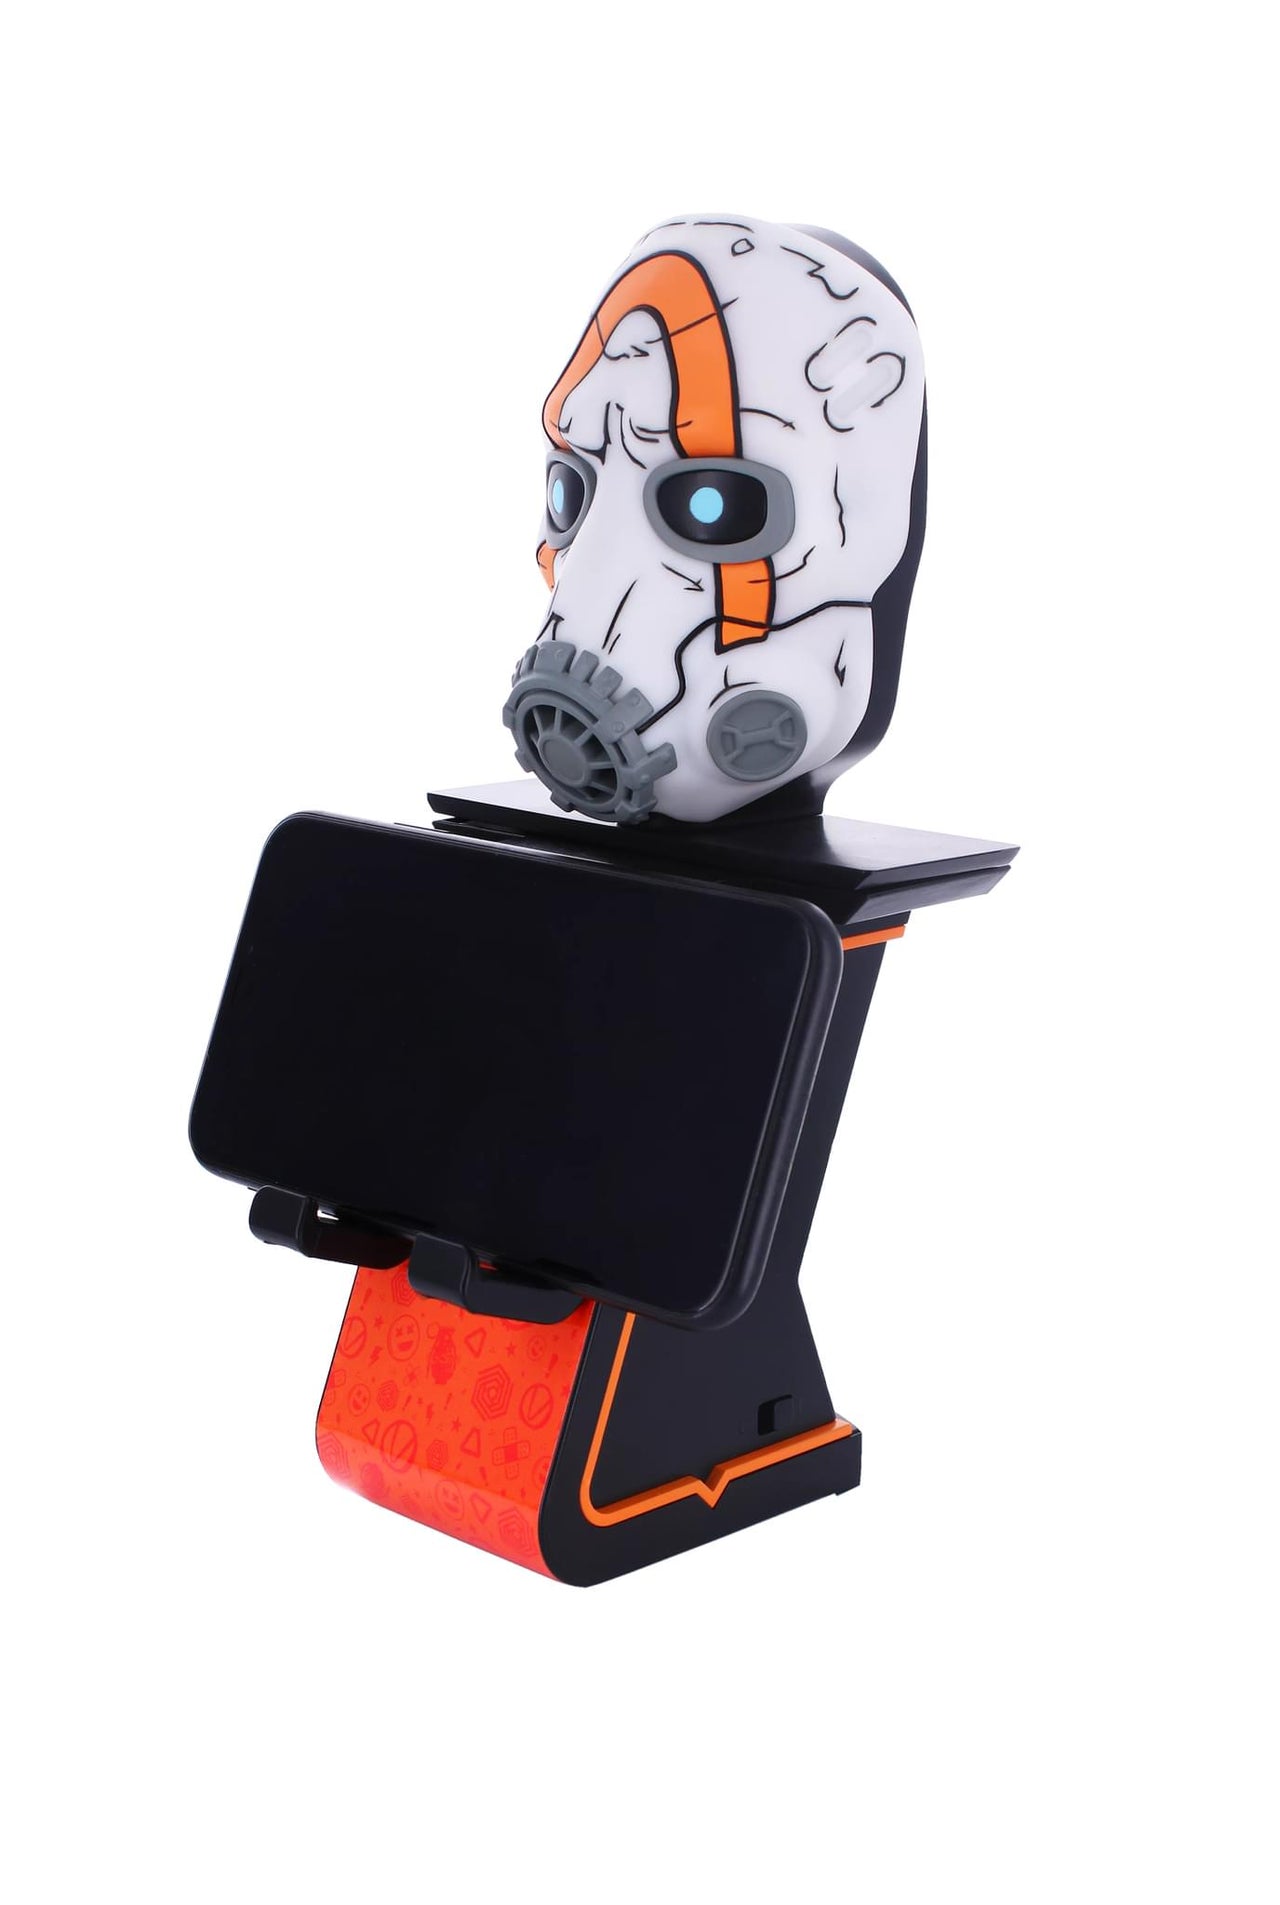 Borderlands: Psycho Cable Guys Light Up Ikon, Phone and Device Charging Stand - EXG Pro